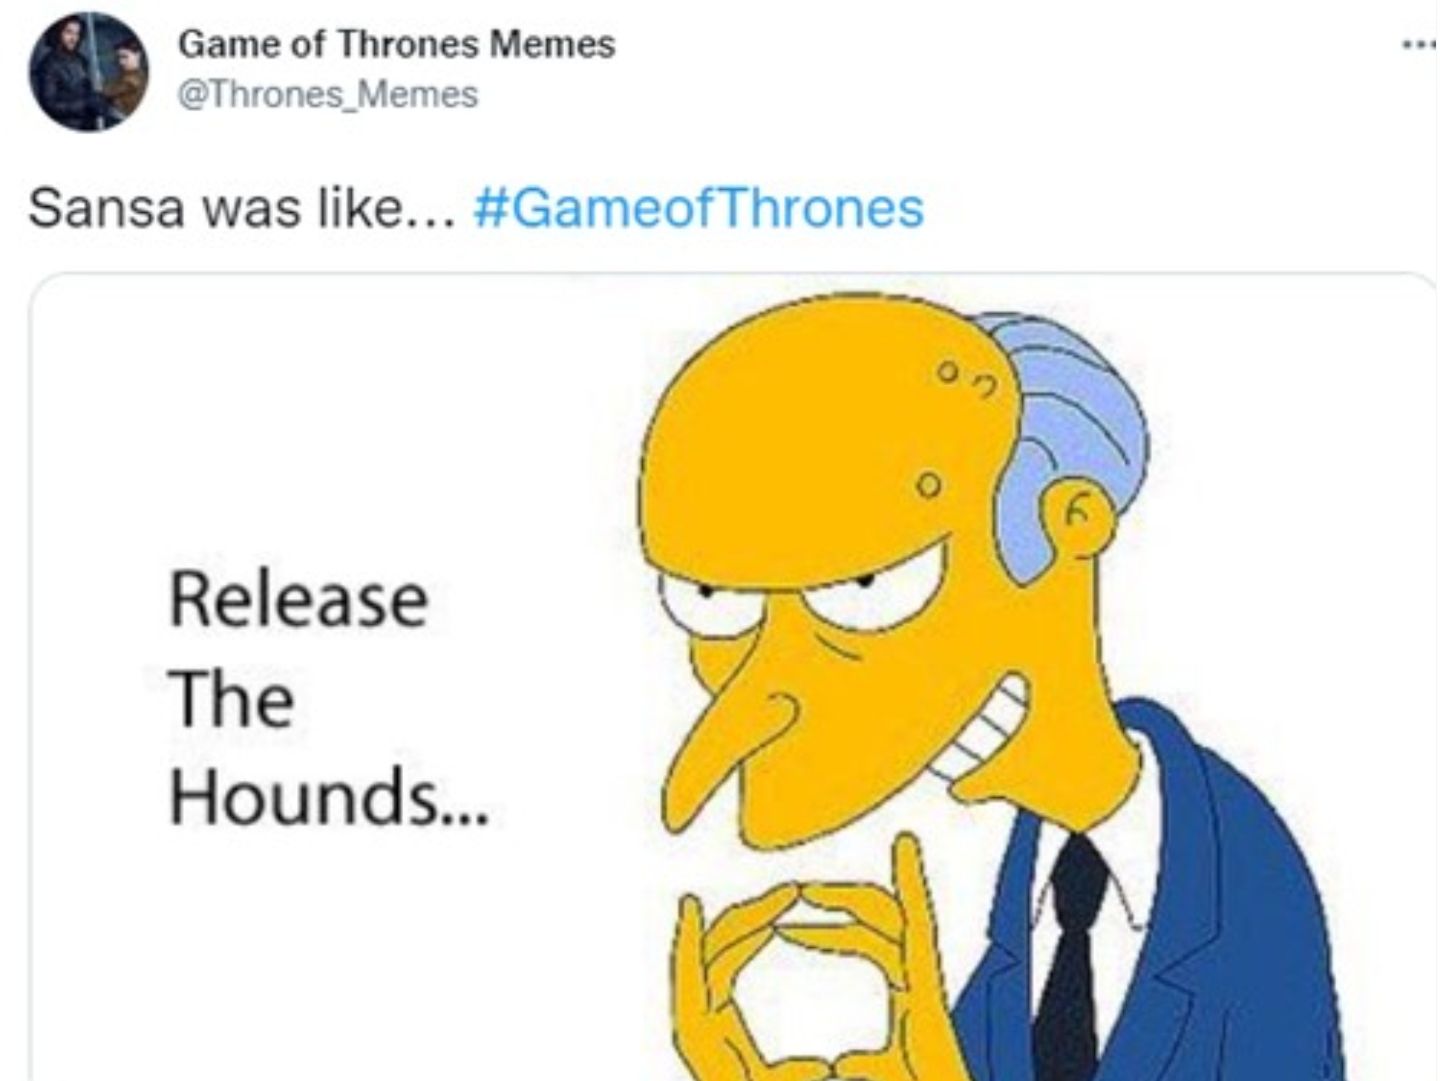 Meme about Sansa feeding Ramsay to his hounds in Game of Thrones. 